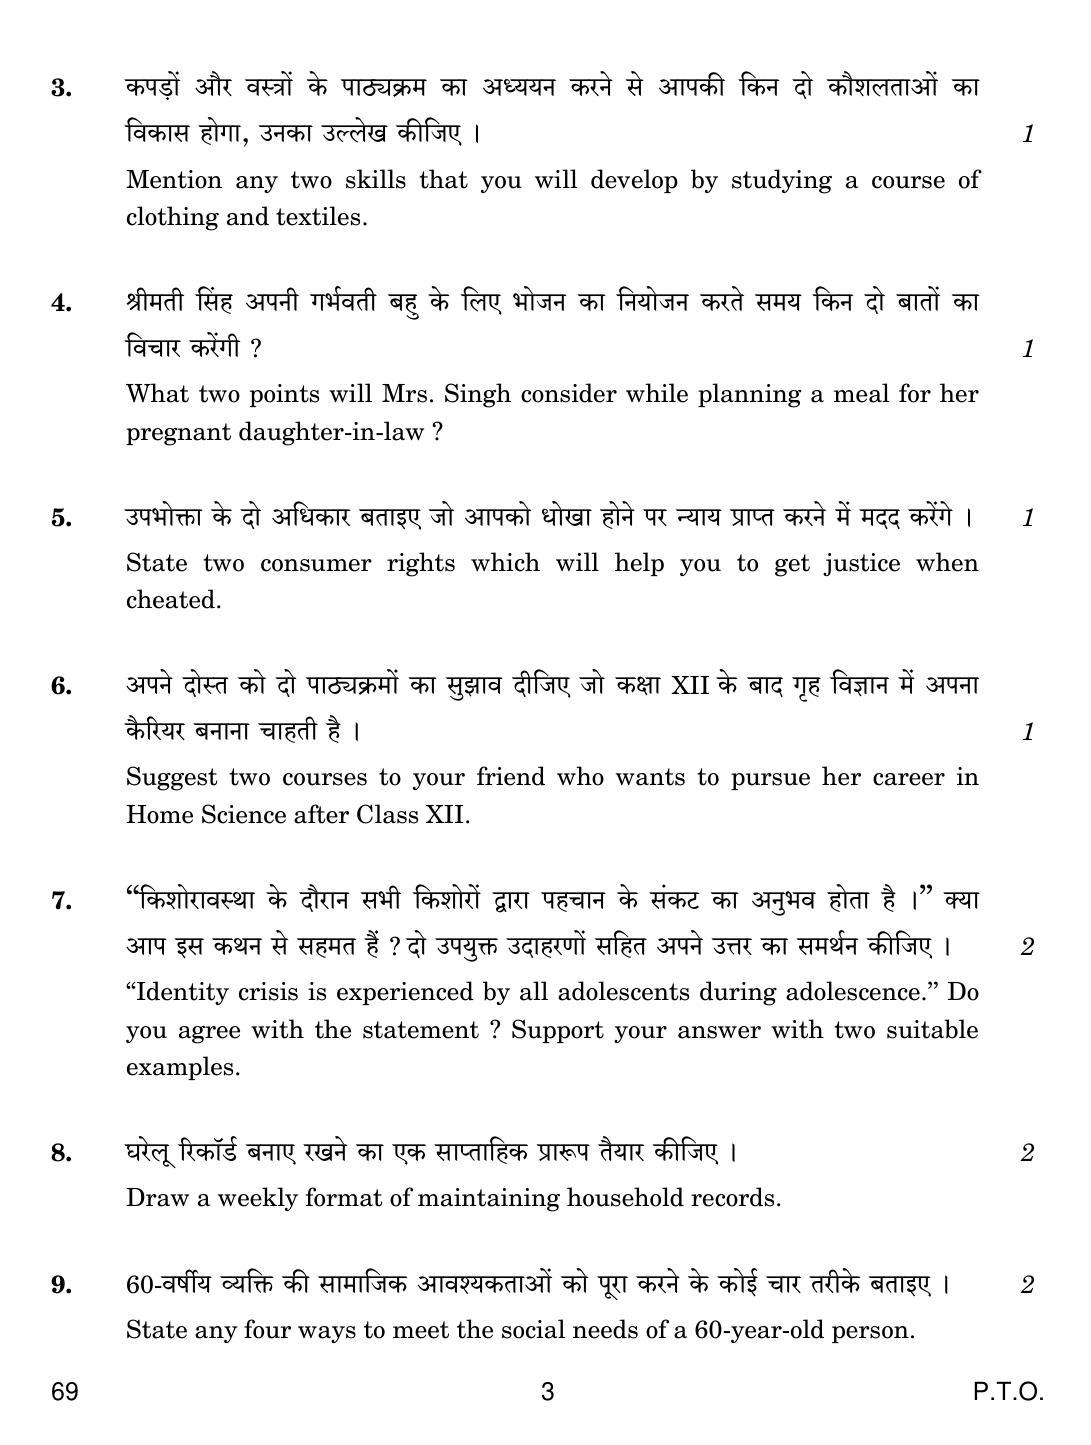 CBSE Class 12 69 HOME SCIENCE 2018 Question Paper - Page 3